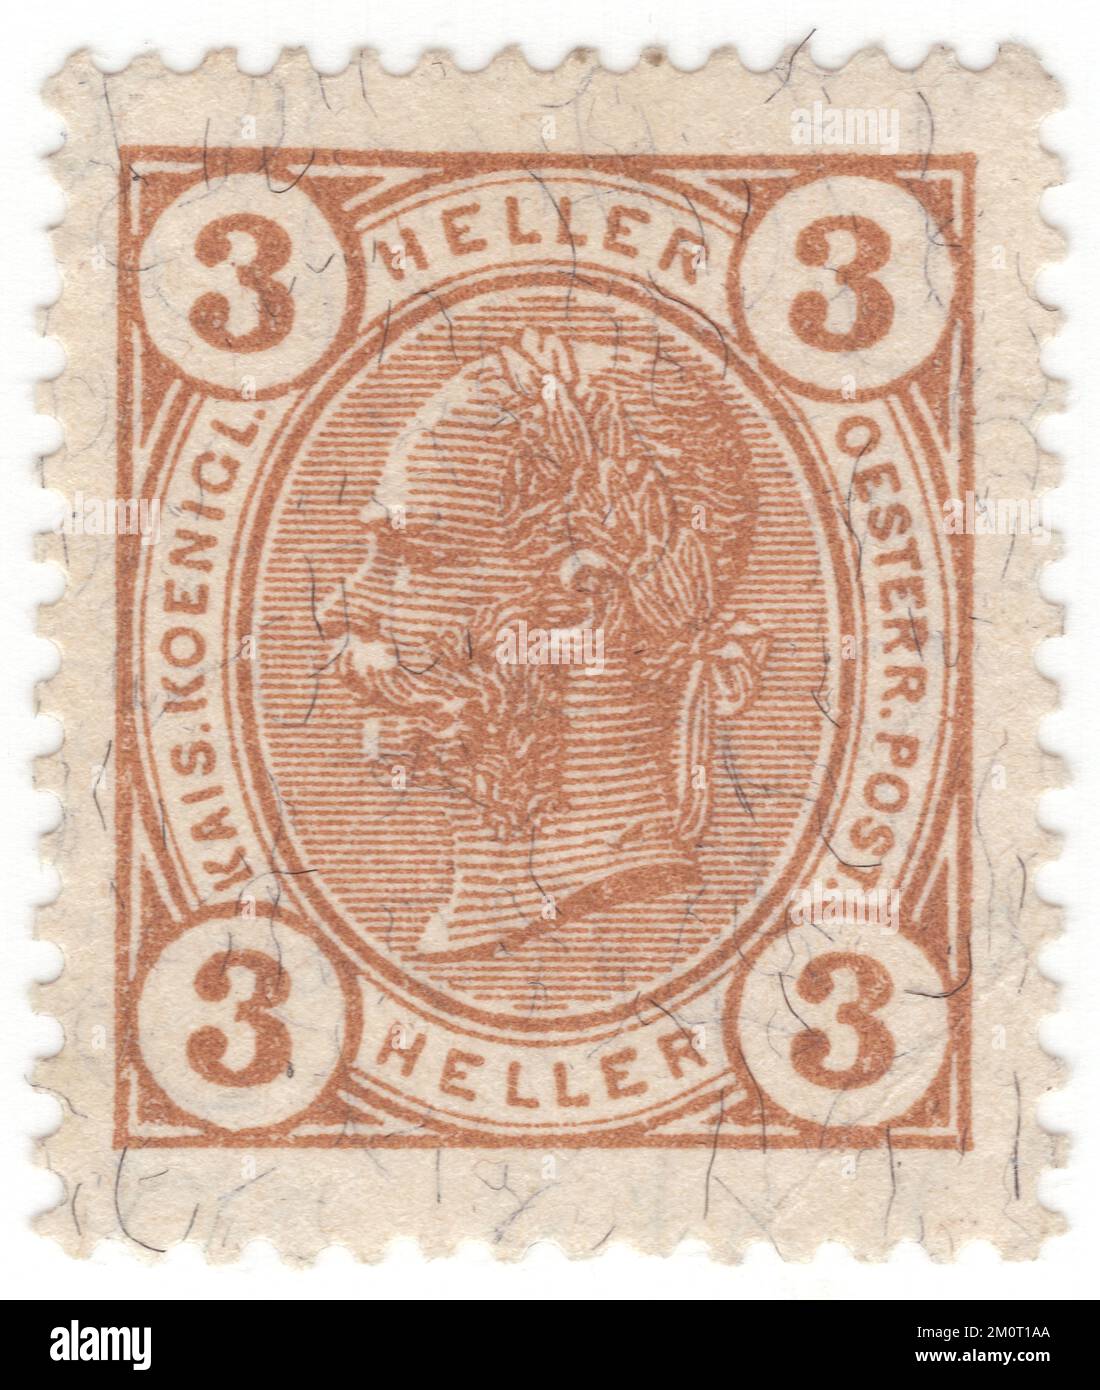 AUSTRIA — 1905: An 3 heller bister-brown postage stamp depicting Embossed portrait of young Austrian Monarch Emperor Franz Josef. Franz Joseph I or Francis Joseph I was Emperor of Austria, King of Hungary, and the other states of the Habsburg monarchy from 2 December 1848 until his death on 21 November 1916. In the early part of his reign, his realms and territories were referred to as the Austrian Empire, but were reconstituted as the dual monarchy of the Austro-Hungarian Empire in 1867. From 1 May 1850 to 24 August 1866, Franz Joseph was also President of the German Confederation Stock Photo